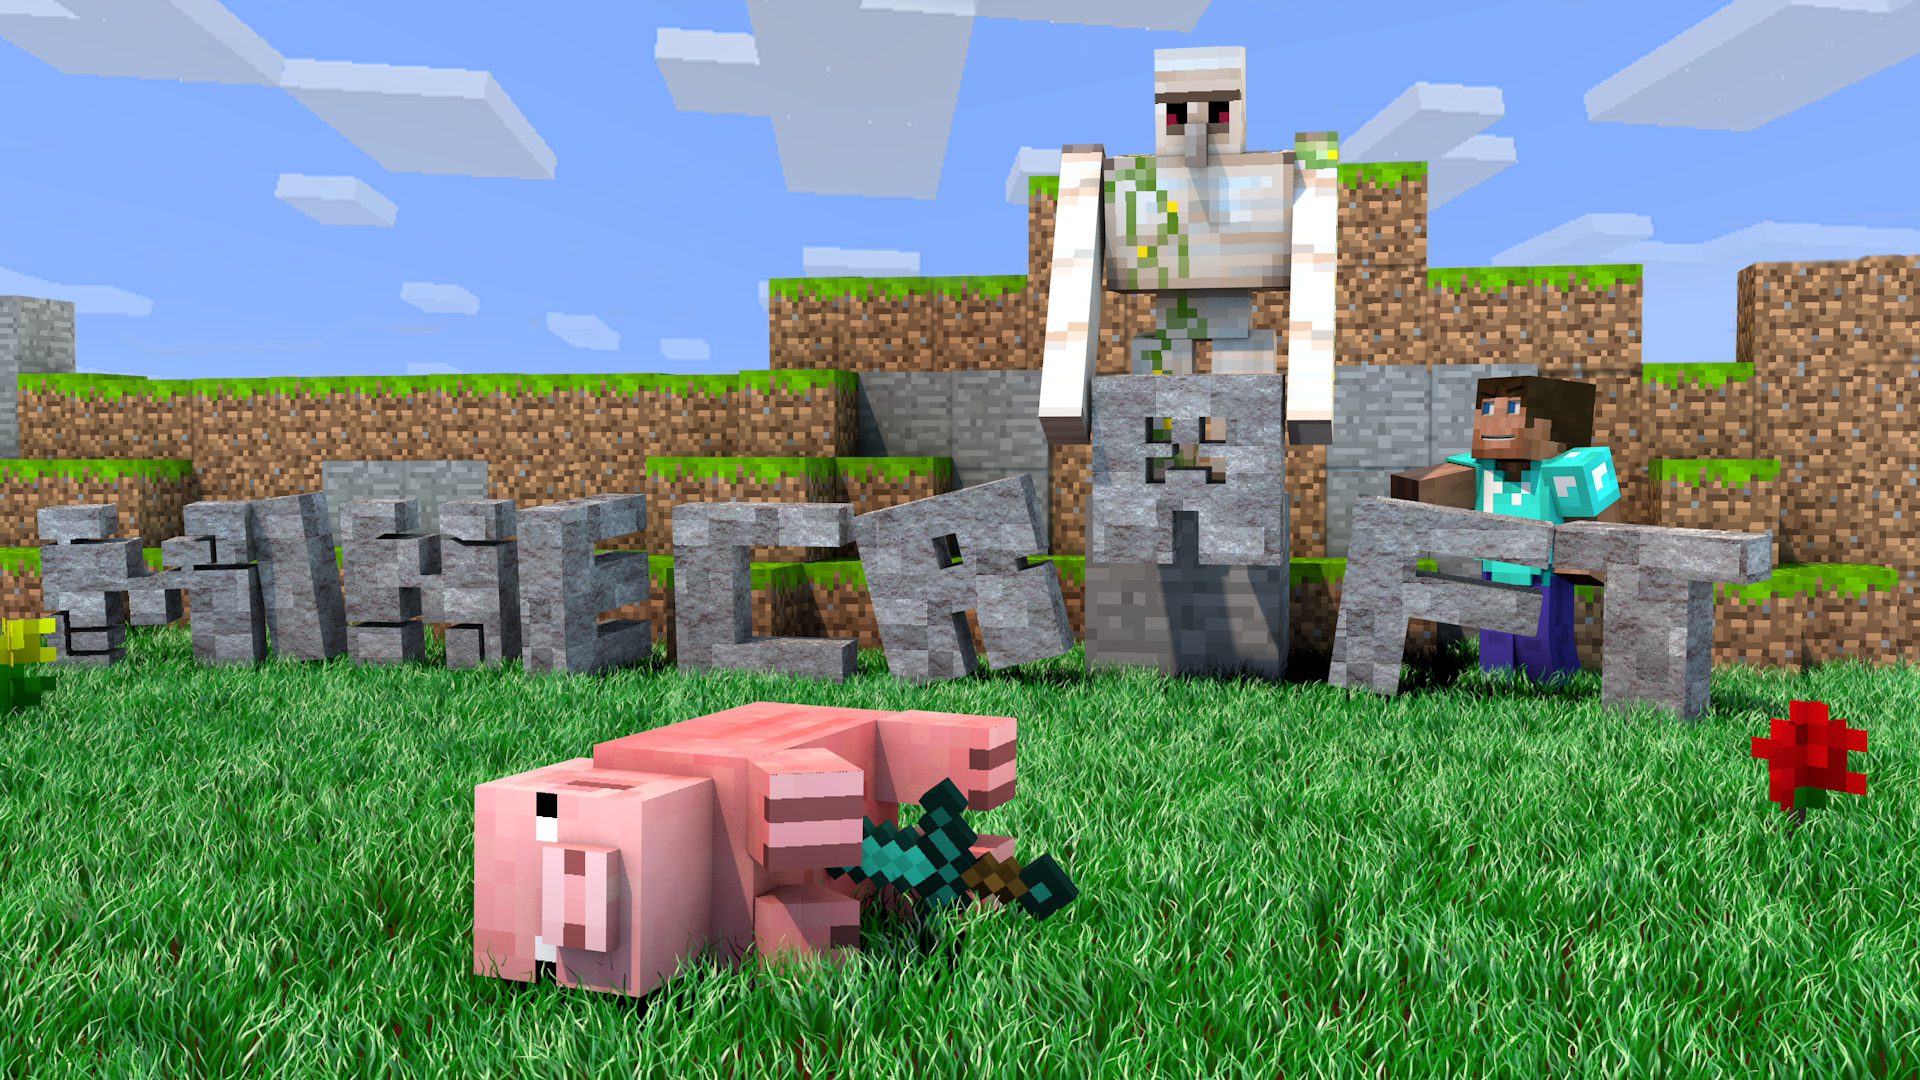 Minecraft Baby Pig Wallpaper Images Pictures   Becuo